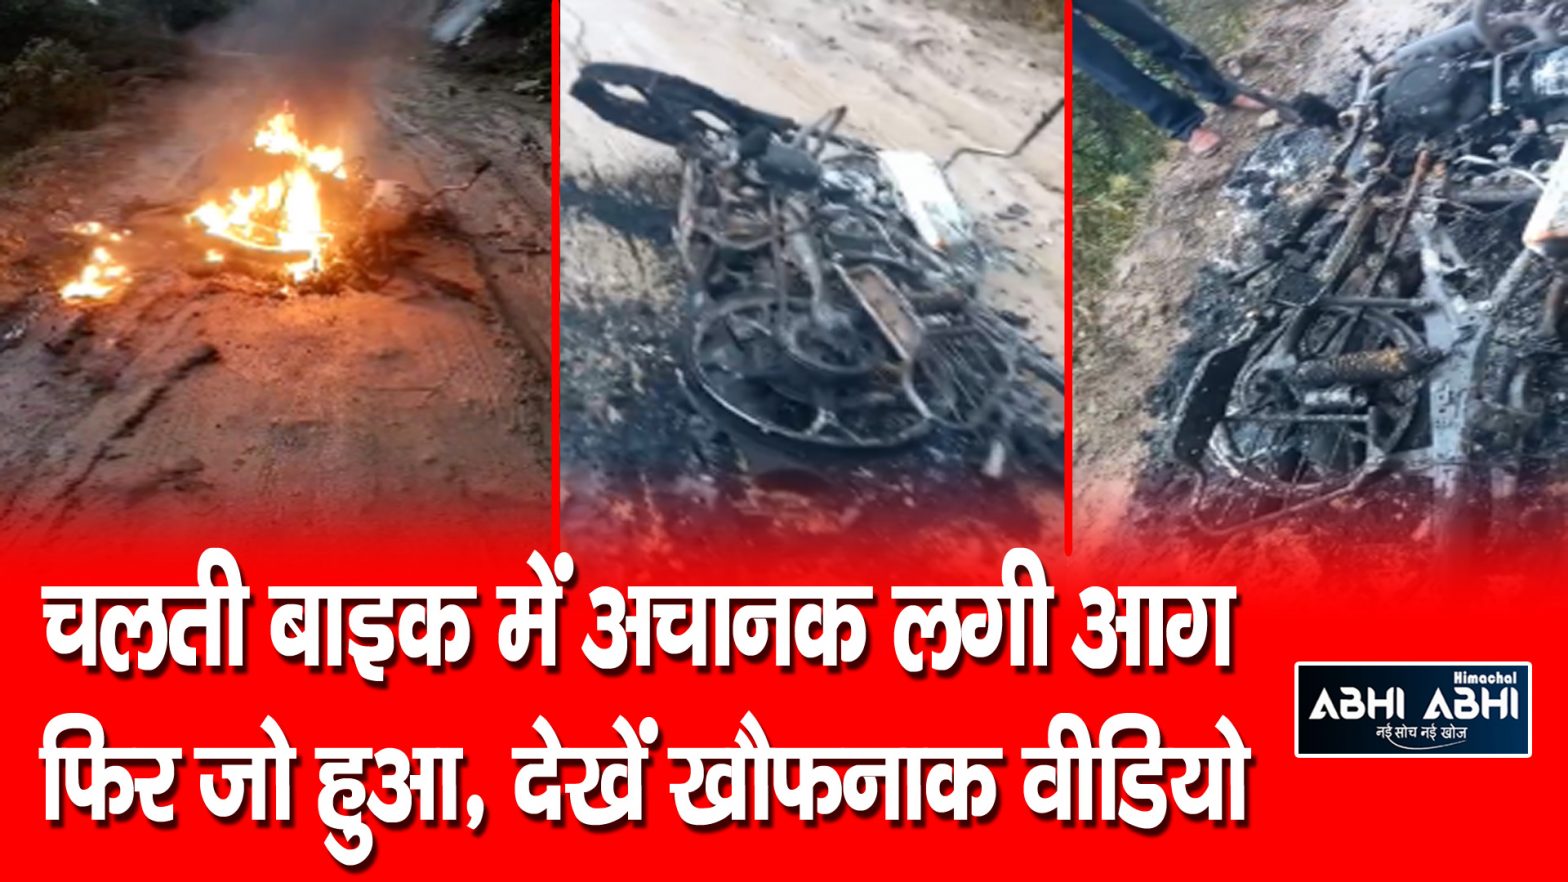 Running bike caught fire in swarghat bilaspur driver escaped